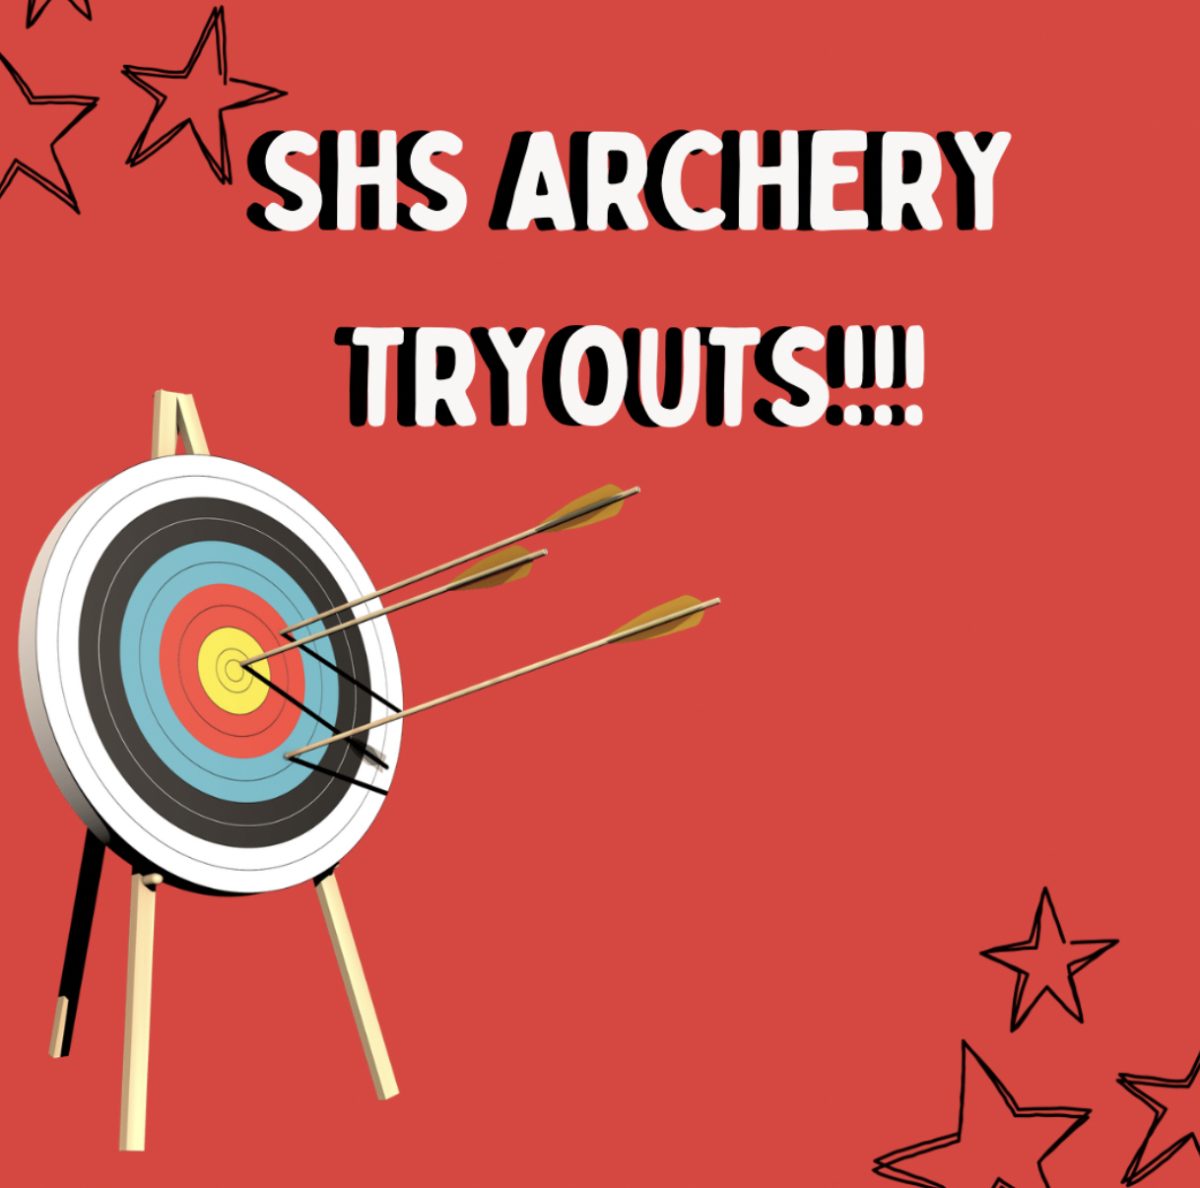 SHS Archery Club is holding tryouts this year on October 19th and 23rd